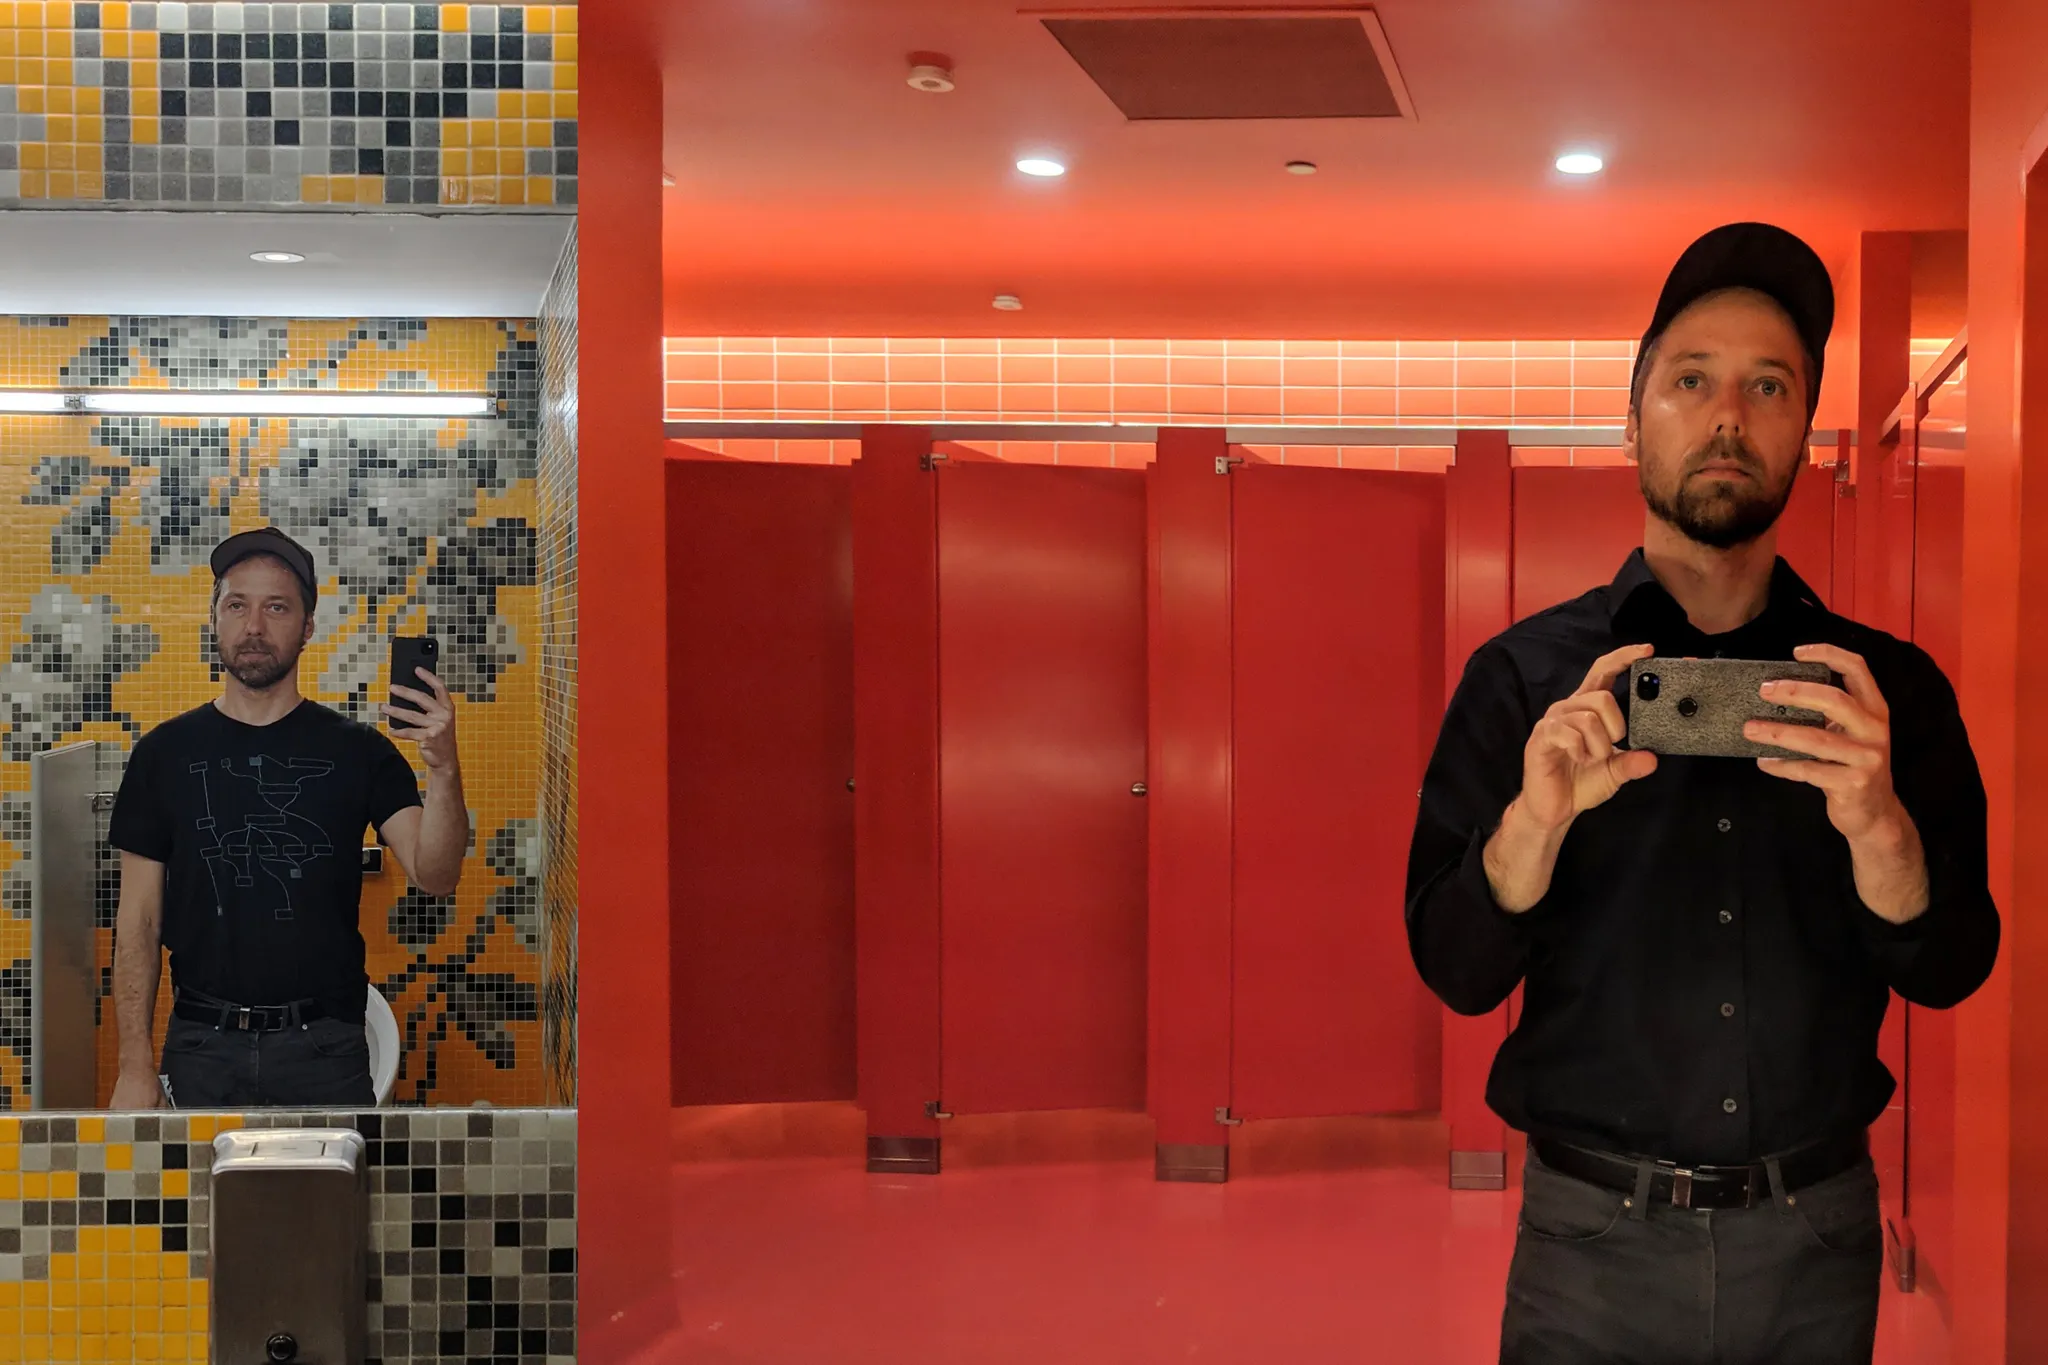 self-portraits in two separate fancy bathrooms